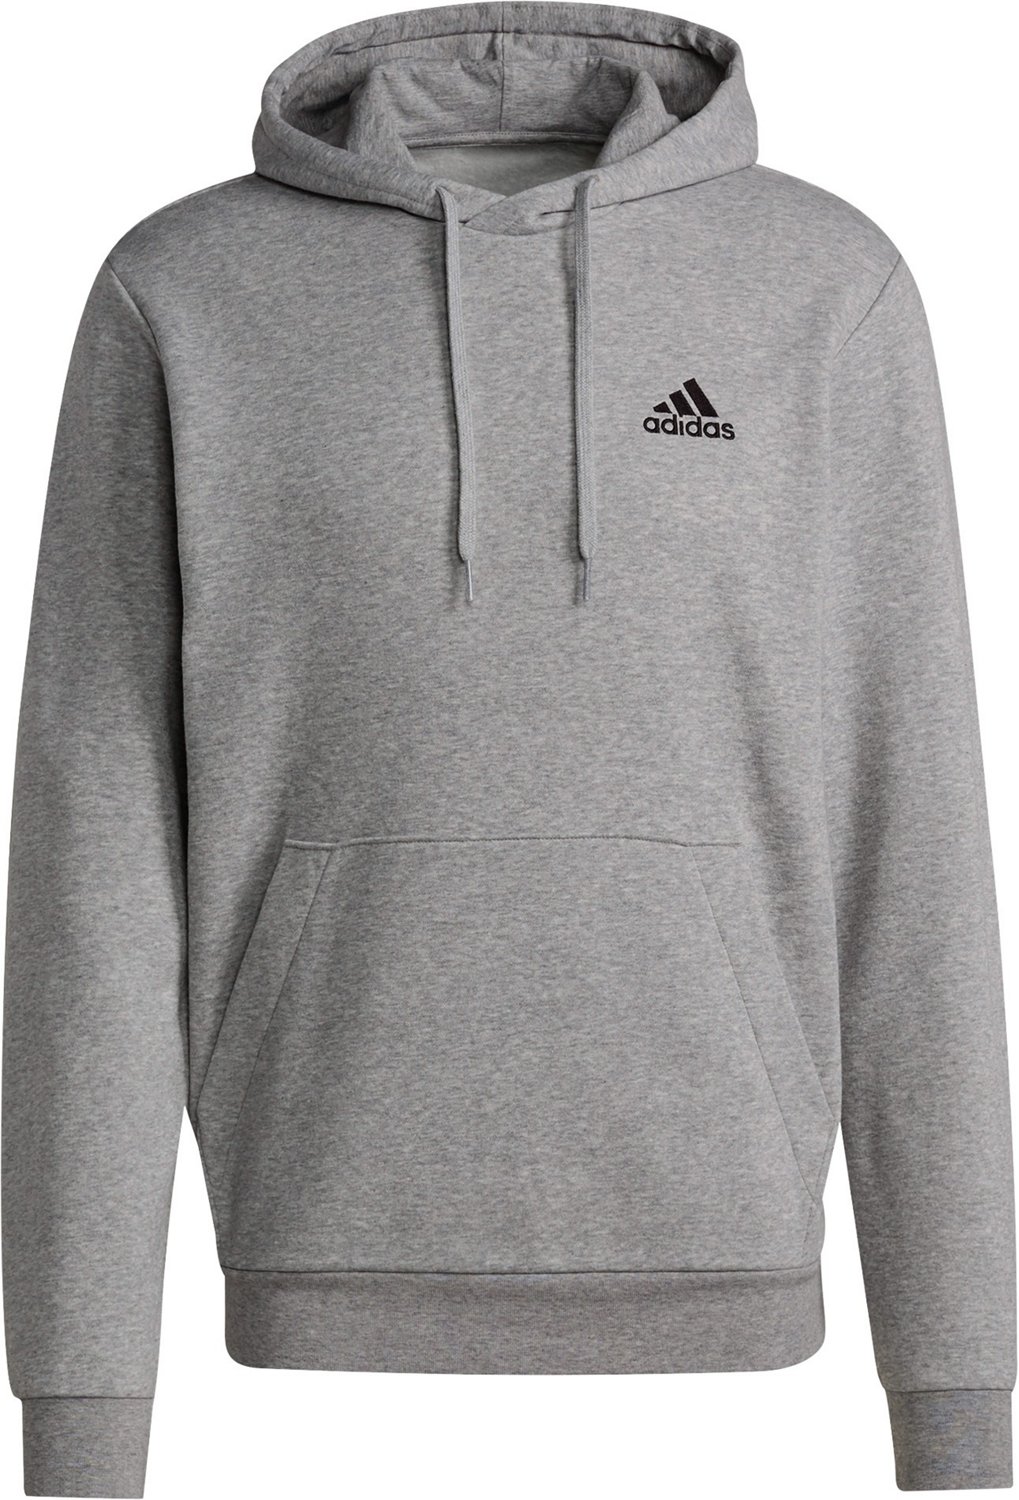 adidas Men's Feel Cozy Pullover Hoodie | Free Shipping at Academy